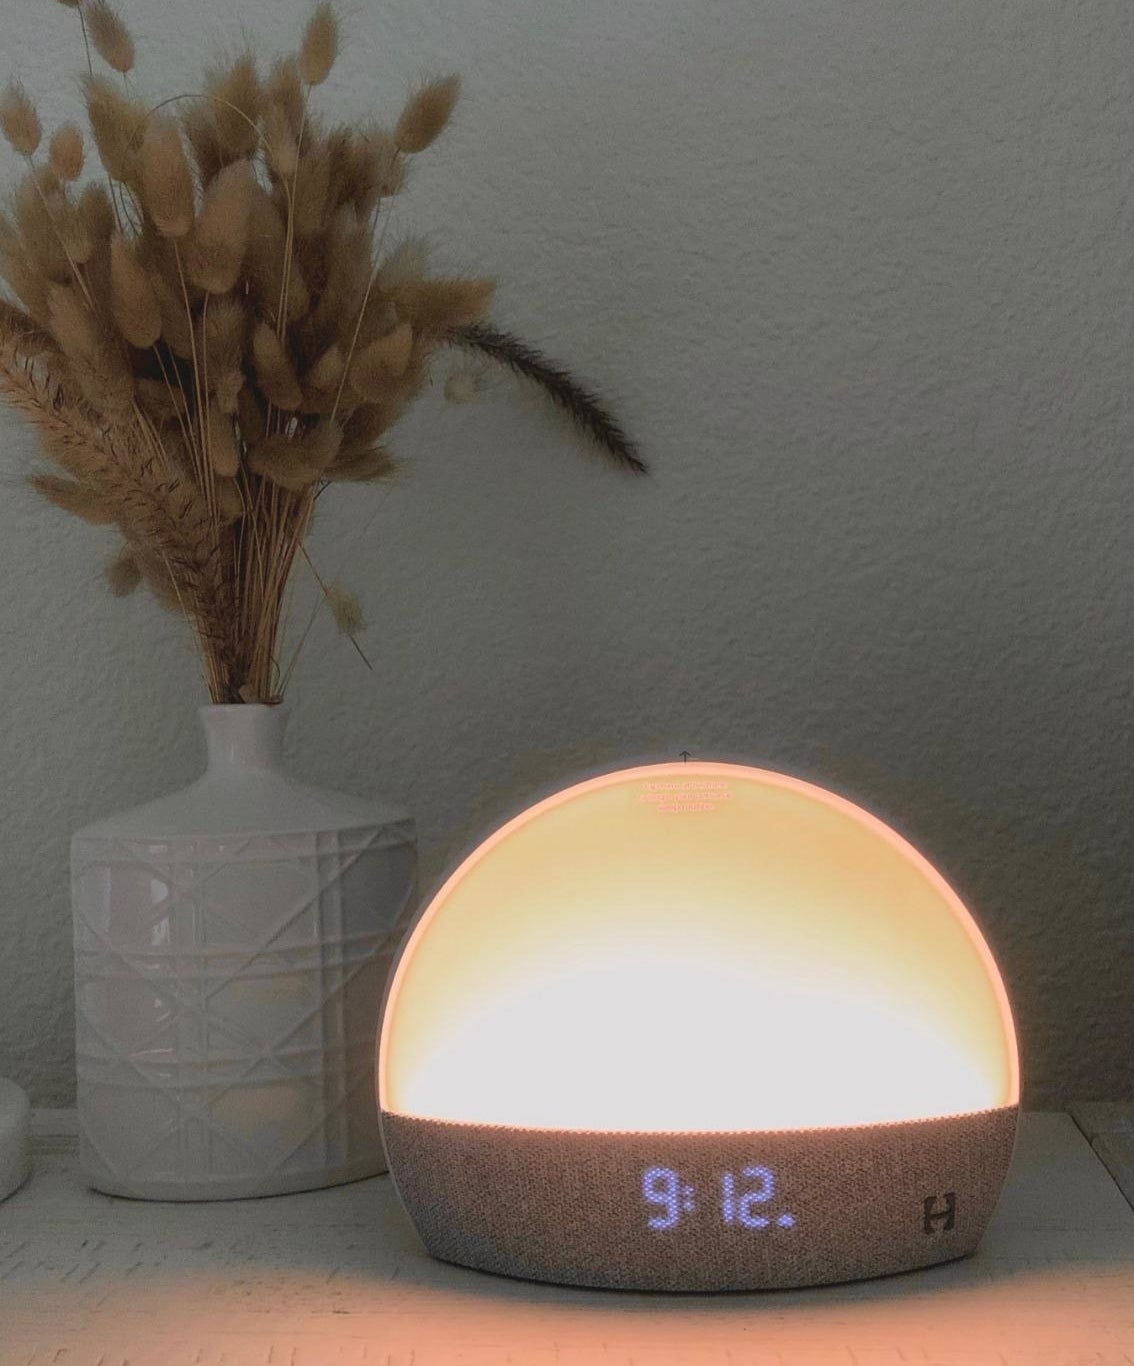 the alarm clock/night light on a reviewer&#x27;s nightstand